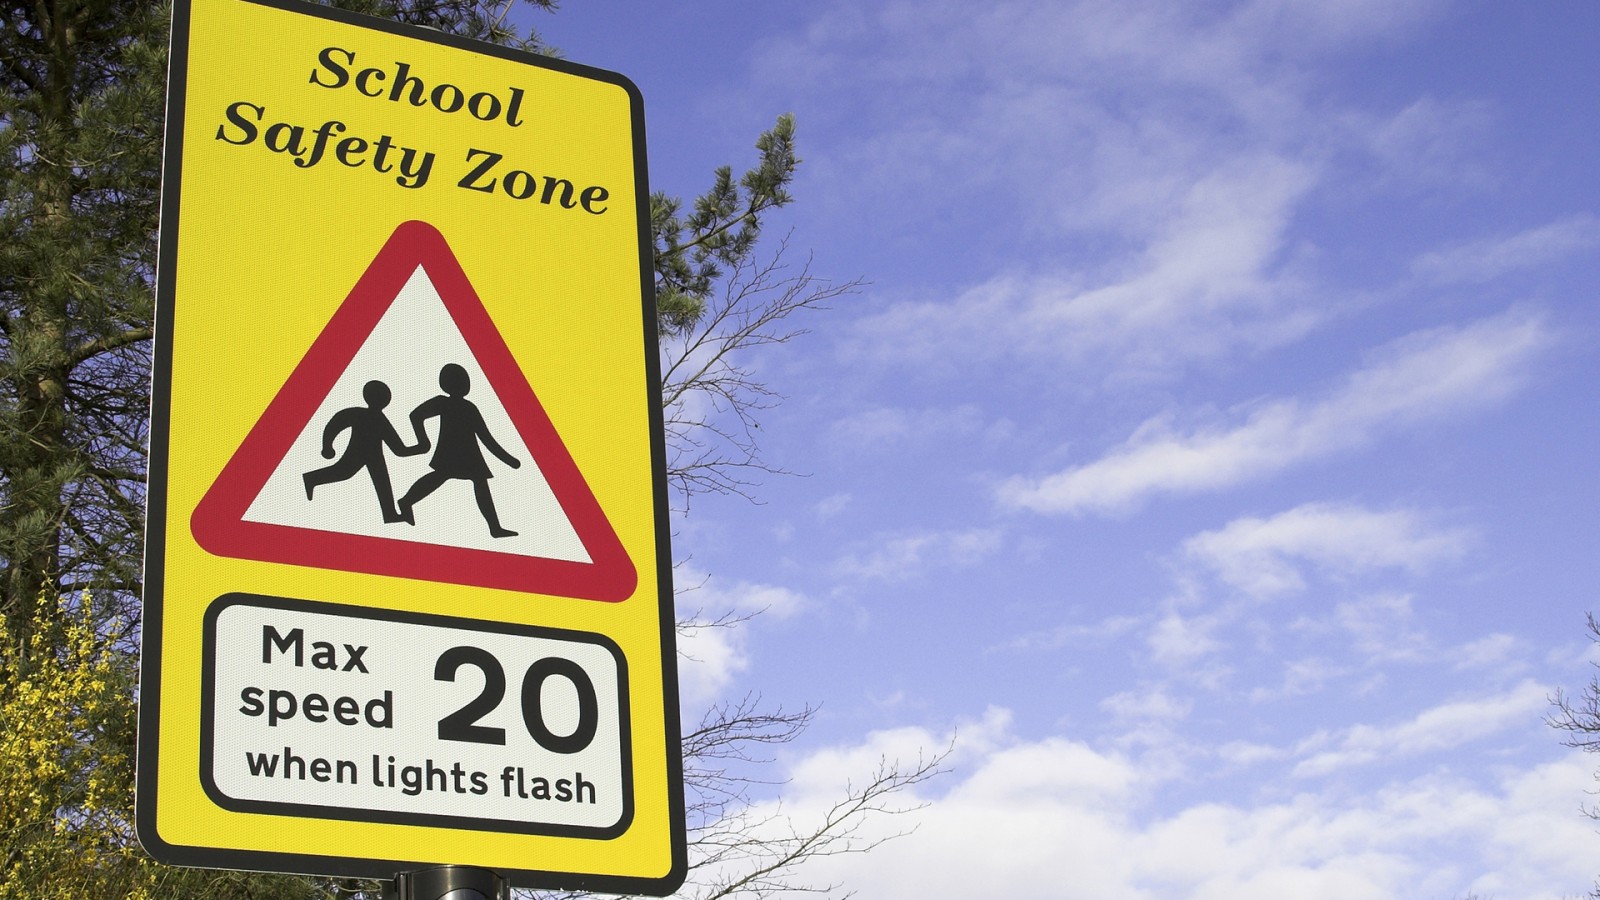 Safety road sign at a school